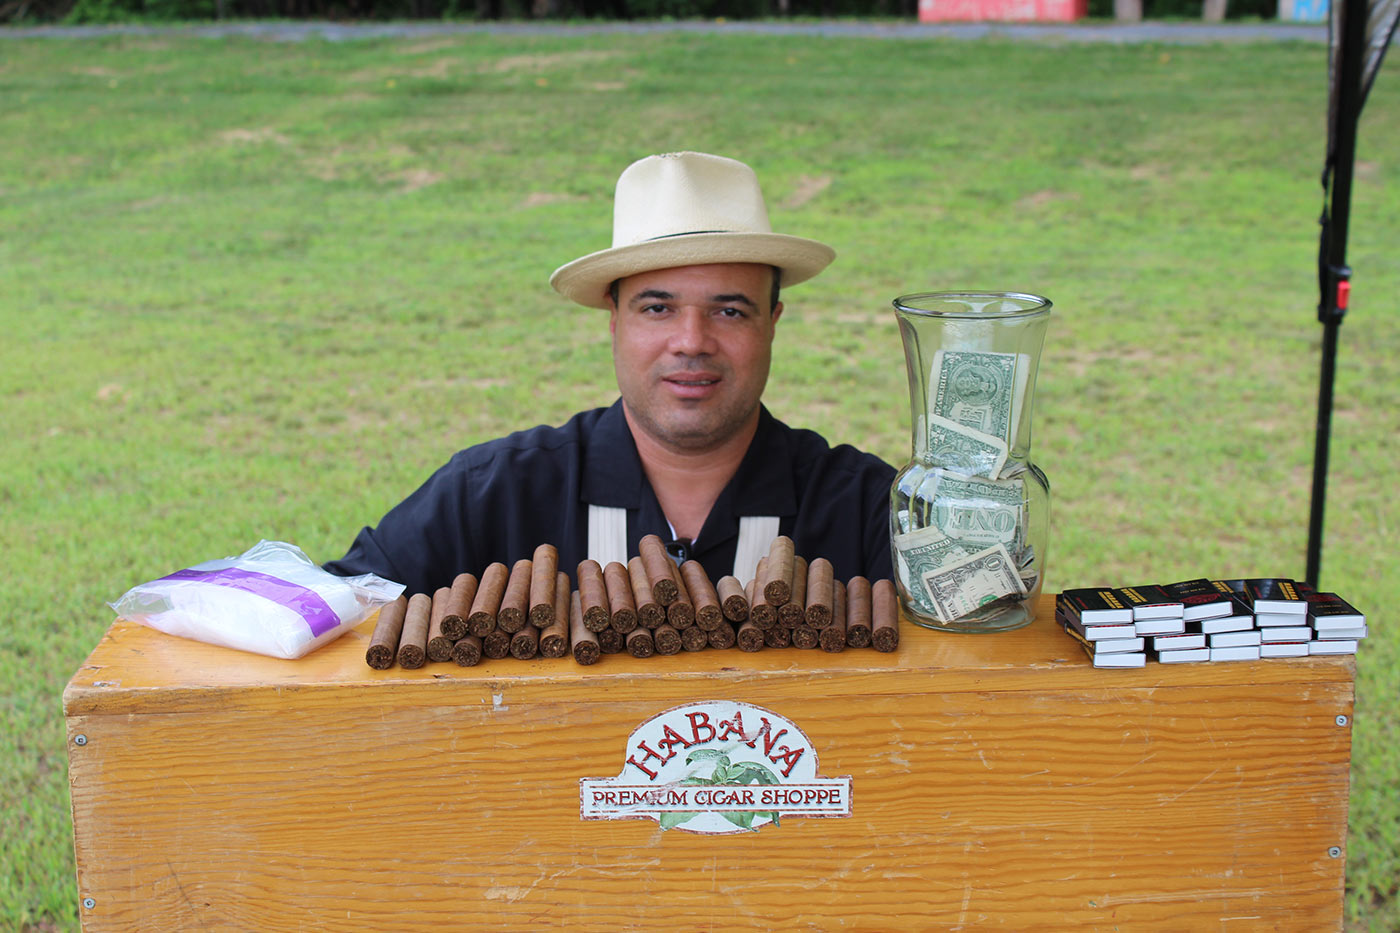 Habana premium cigars rolling cigars for guests to enjoy at AIM Services Croquet on the Green event